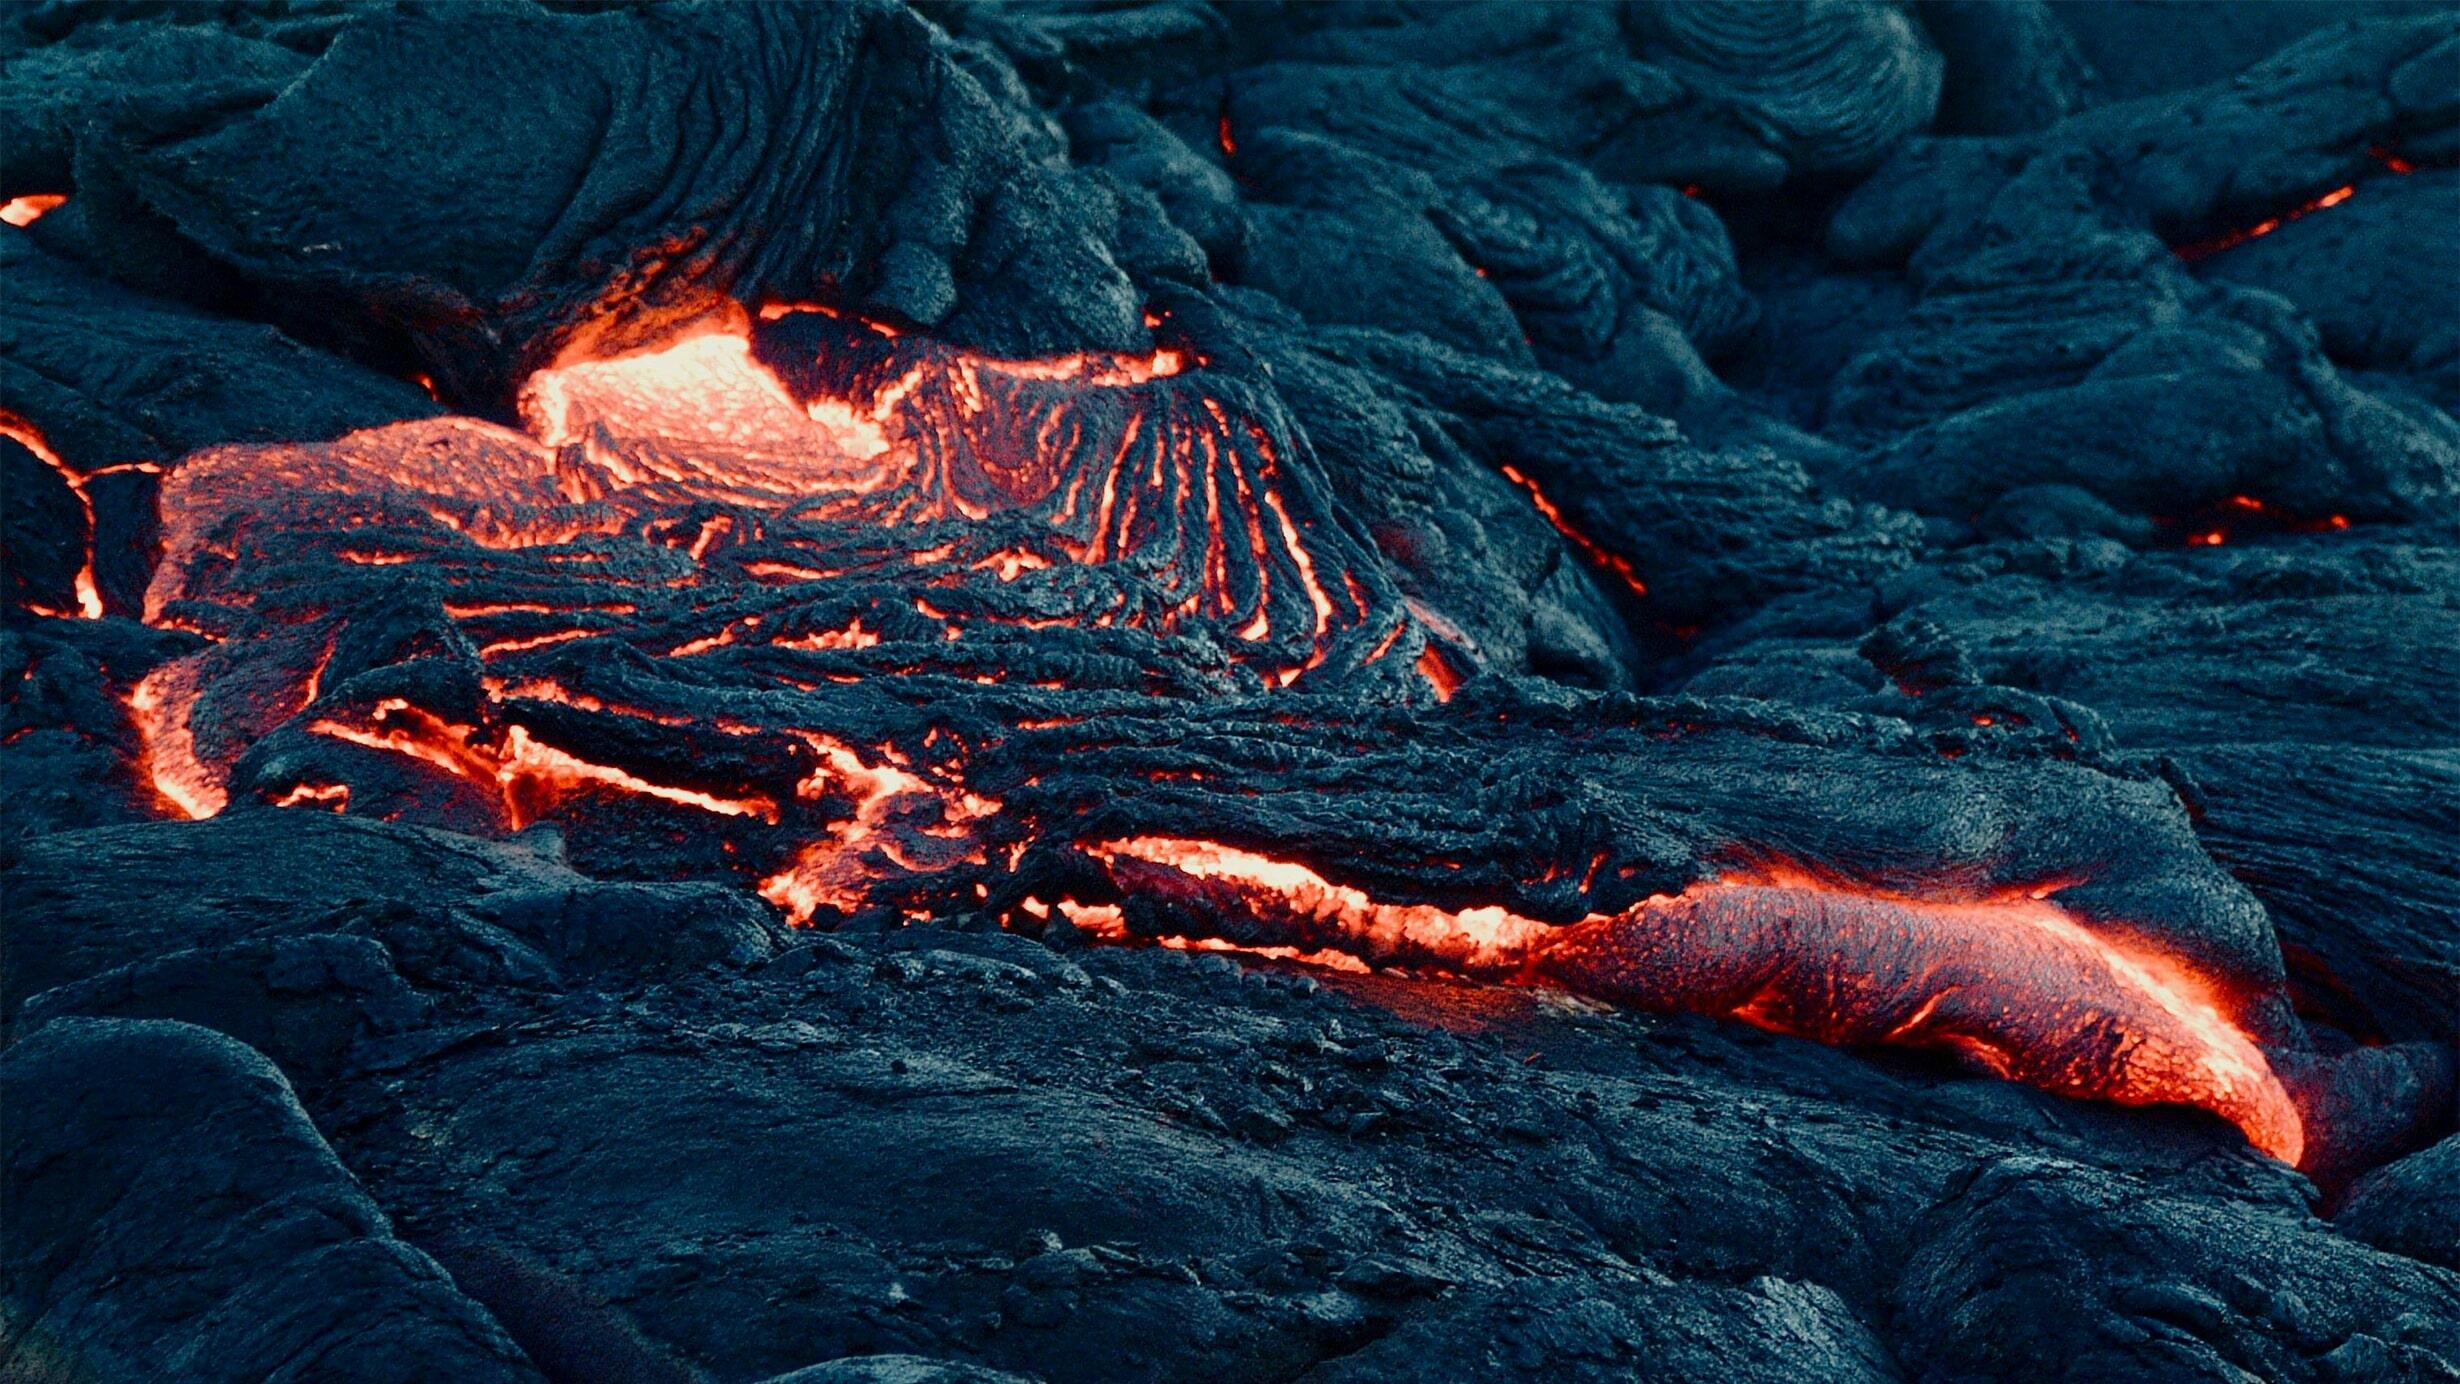 An up-close photo of flowing lava: magma appears as a bright orange, flowing river through cooled black rock.